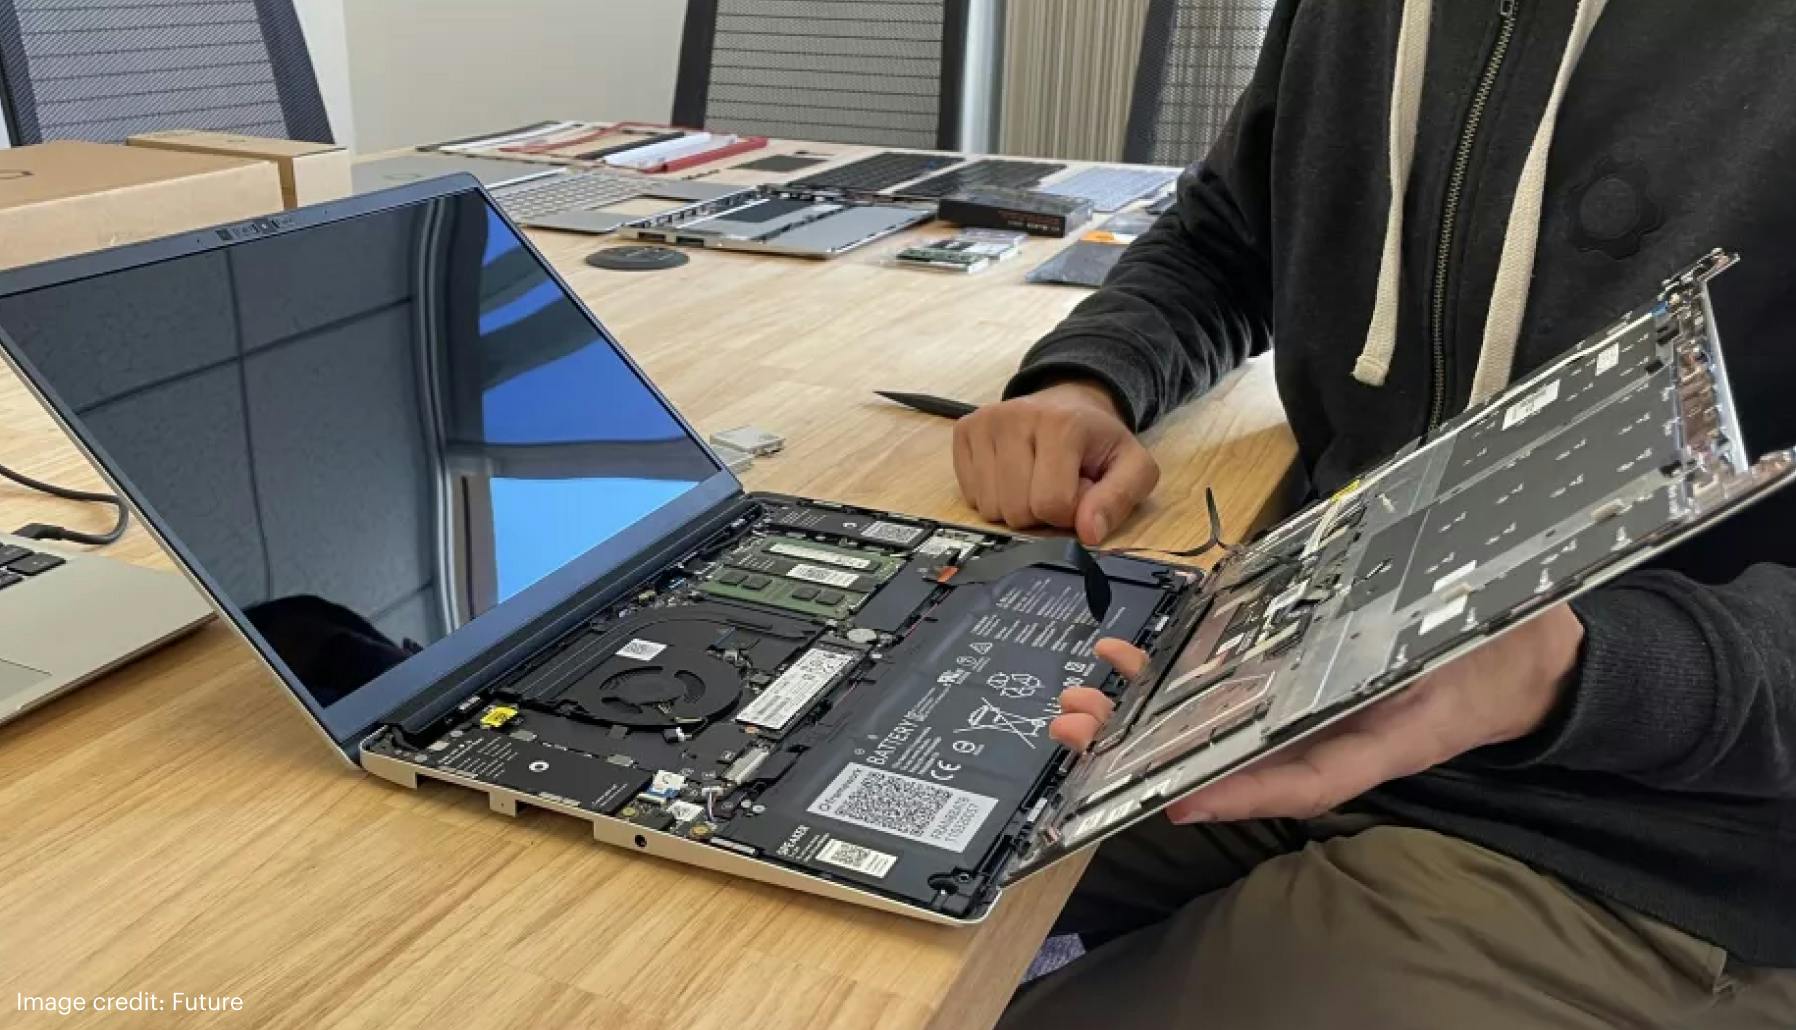 A person with an open Framework Laptop